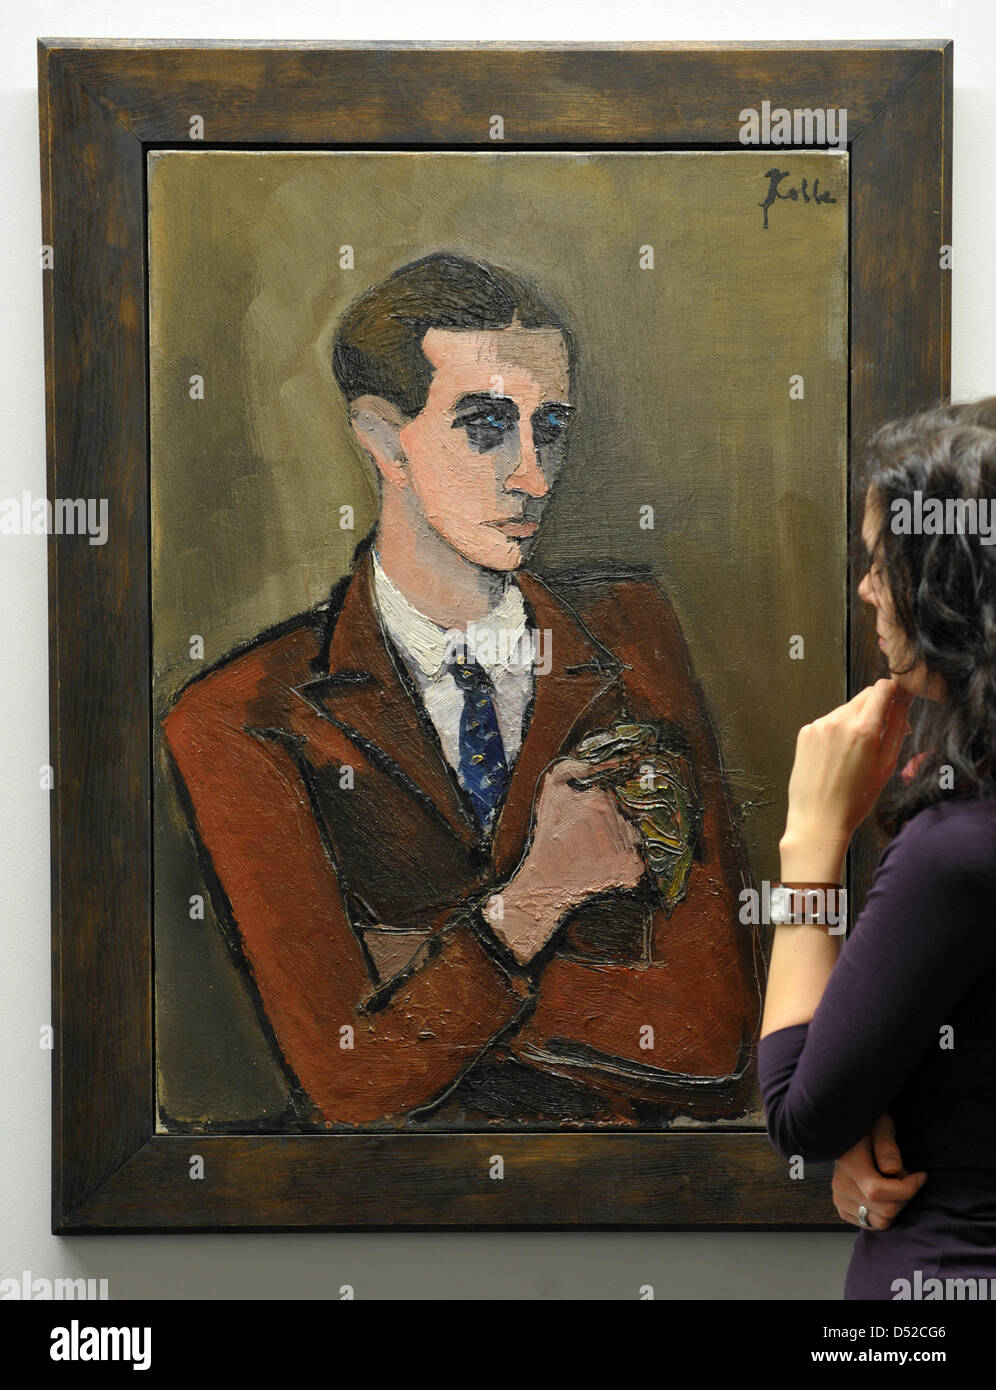 A young woman observes the painting 'Self-portrait with handkerchief' of Helmut Kolle of the art collection Chemnitz at the Museum Gunzenhauser in Chemnitz, Germany, 04 November 2010. The exhibition with the title 'Helmut Kolle. A German in Paris' is opened on 06 November 2010 and presents 90 artworks of the remarkable artist. Photo: Hendrik Schmidt Stock Photo